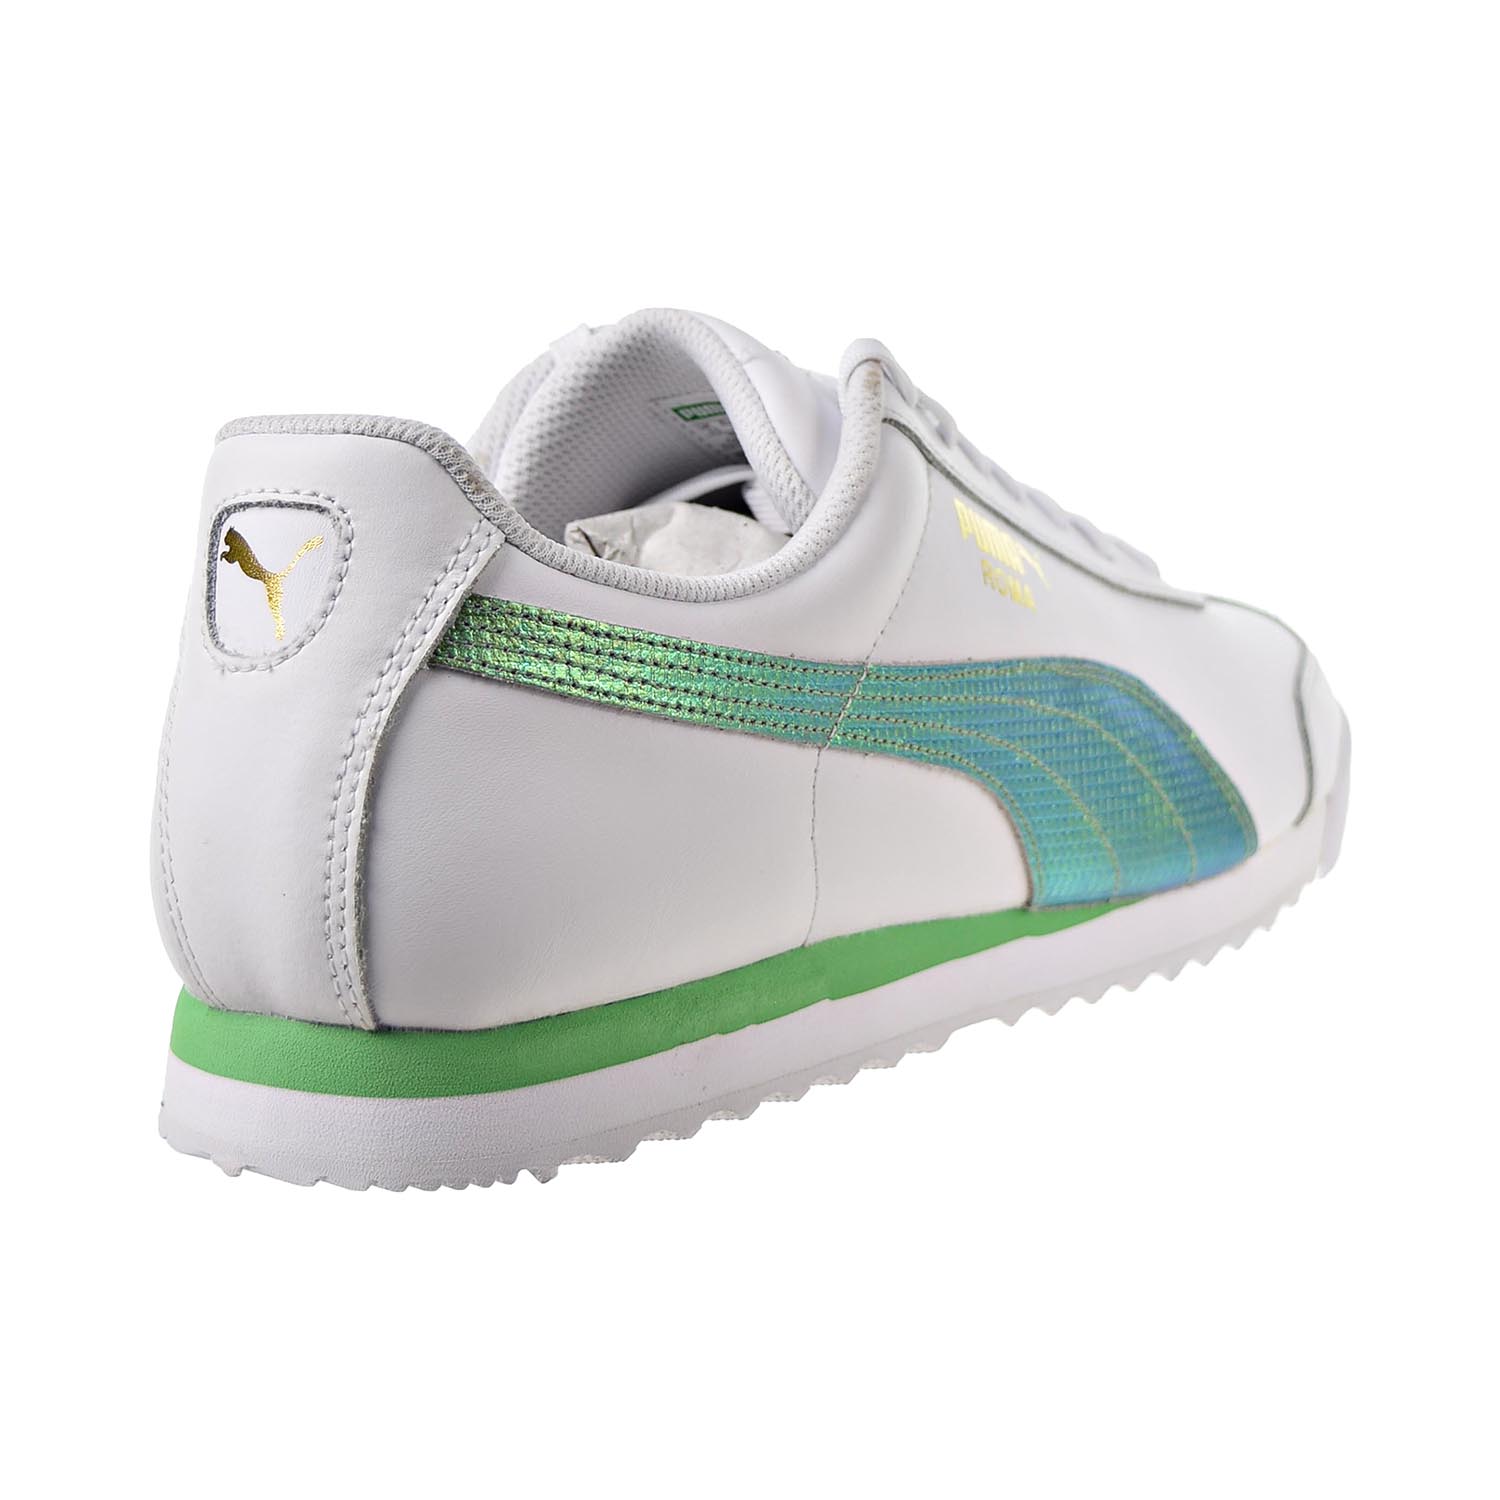 Puma Men's Roma Basic Holo White / Green Gecko Ankle-High Leather Fashion Sneaker - 11.5M - image 3 of 6